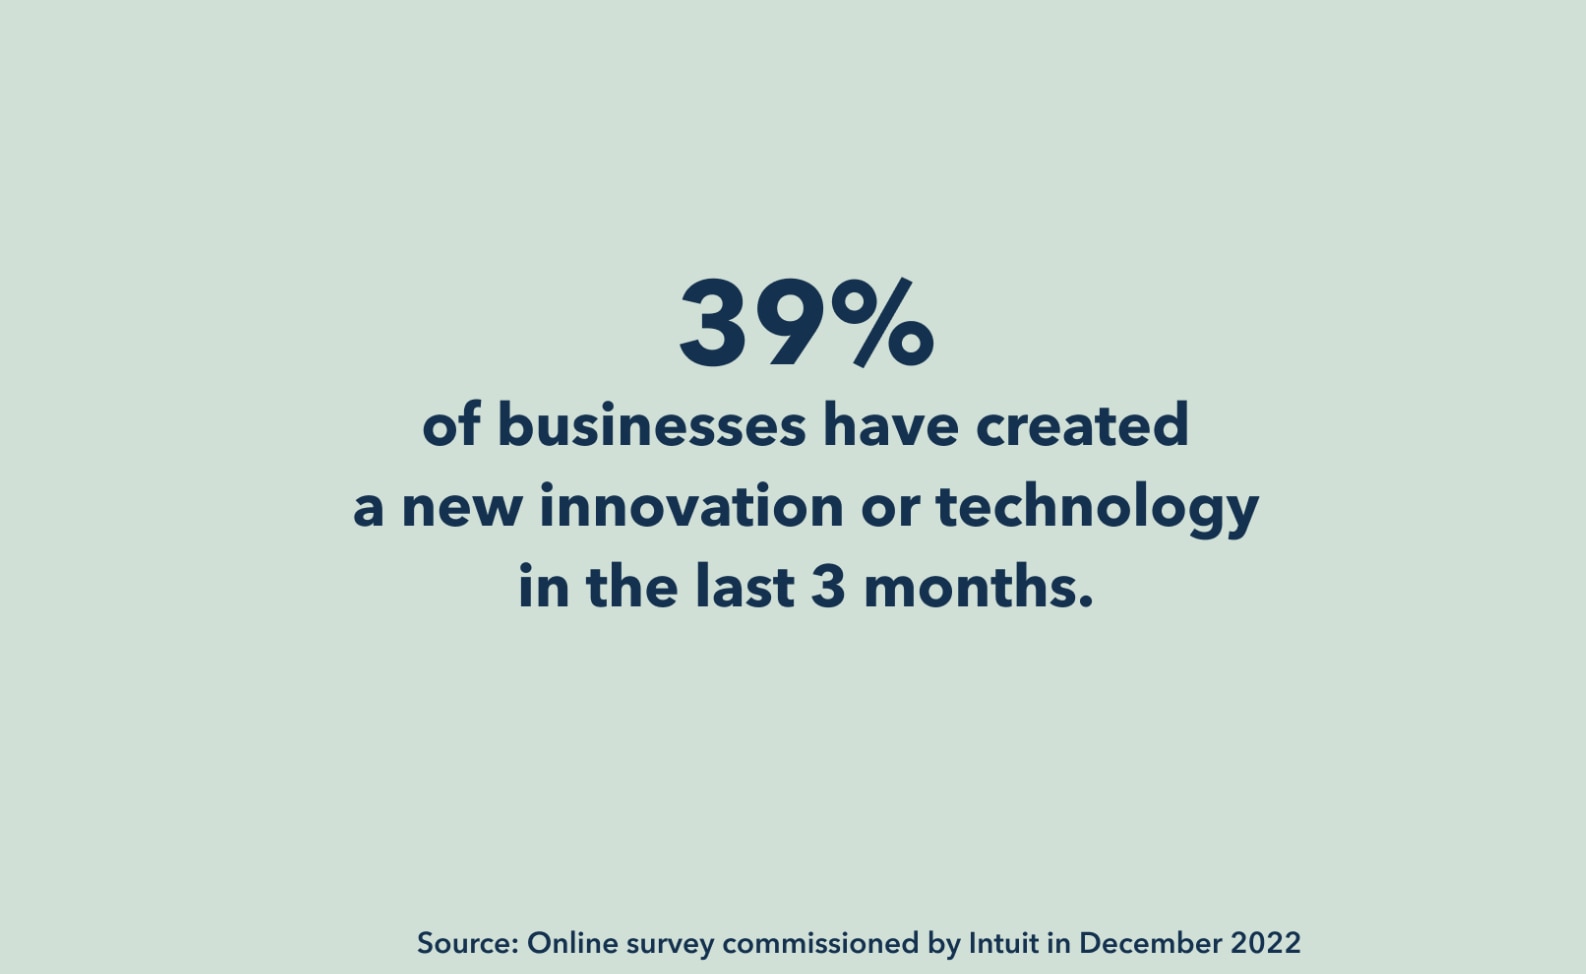 39% of businesses have created a new innovation or technology in the last 3 months.